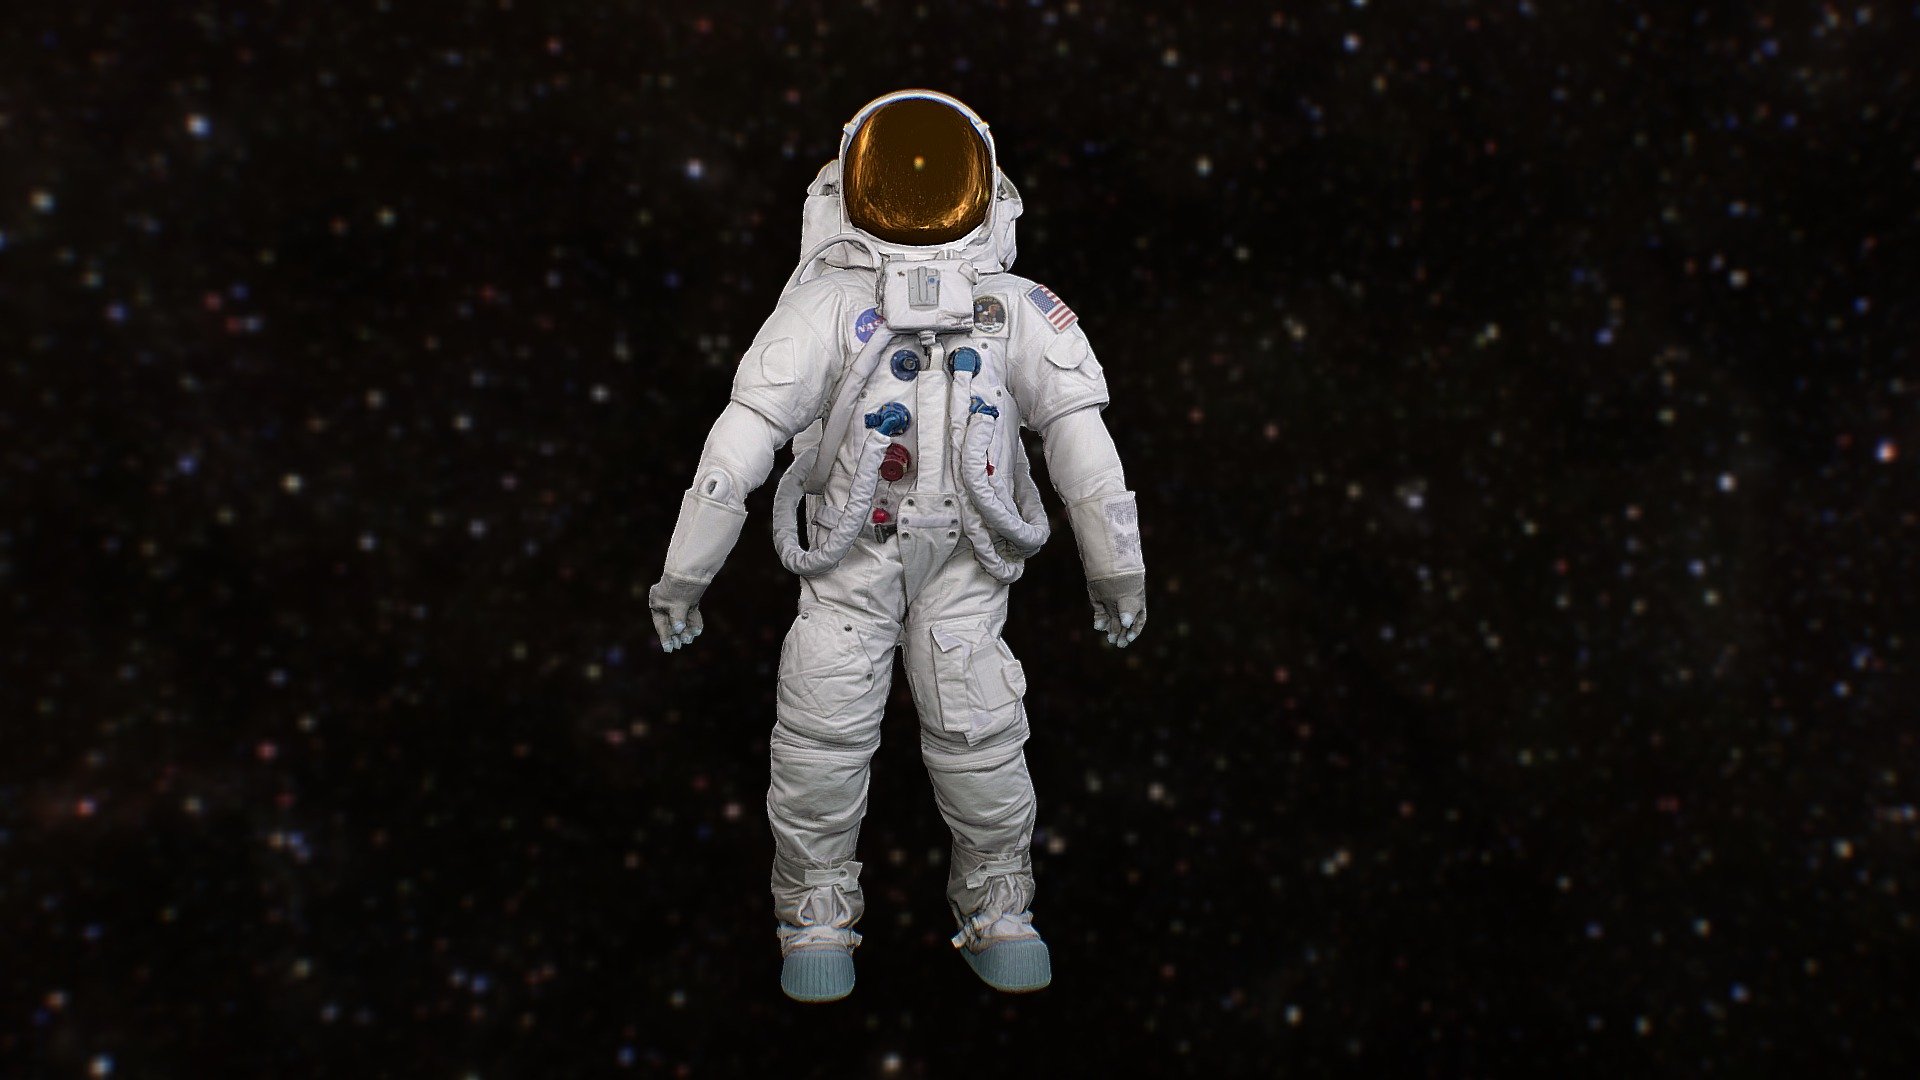 See Arc/k Catalog Page - https://collections.arck-project.org/view/ARCK3D0000000315/

Photogrammetry of a USA space suit replica from the Apollo 11 space mission set up for lunar exporation.

The Arc/k Project is dedicated to digitally preserving and sharing cultural heritage in new and powerful ways for advocacy, access, education and research. Support The Arc/k Project: https://arck-project.org/support-the-arck-project/ - United States Spacesuit (Lunar Mode) - 3D model by arck-project 3d model